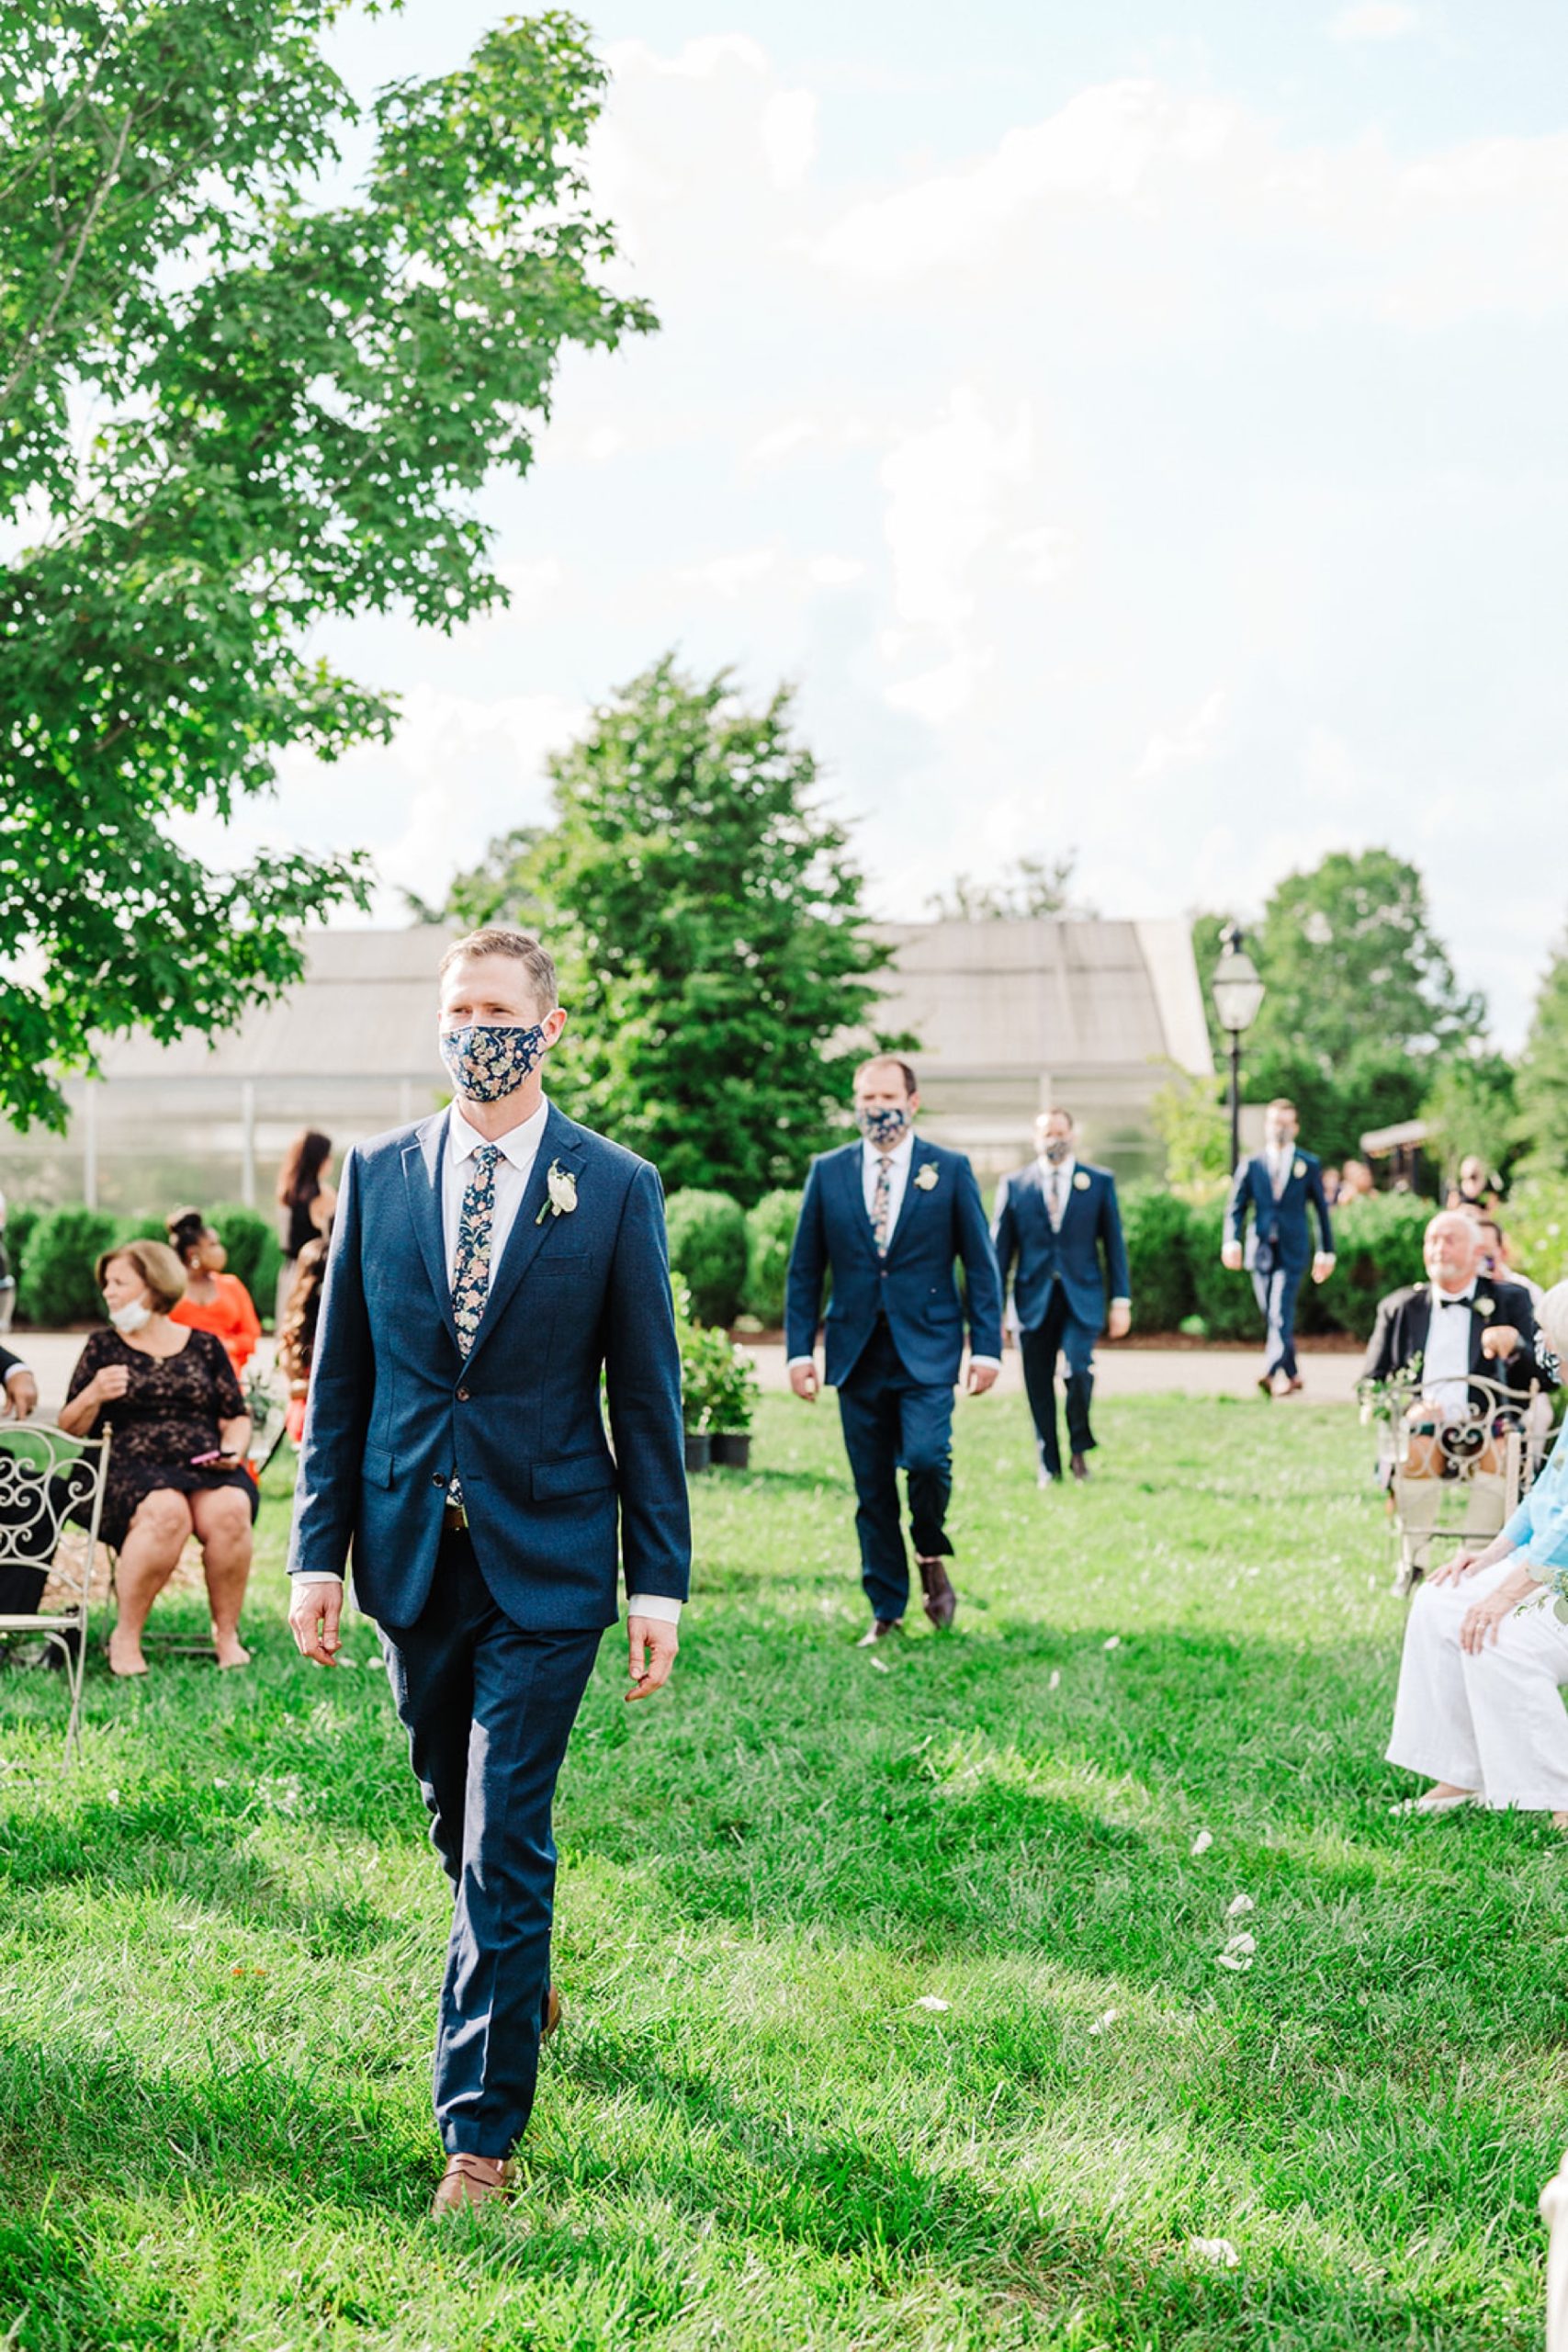 COVID groomsmen style with masks